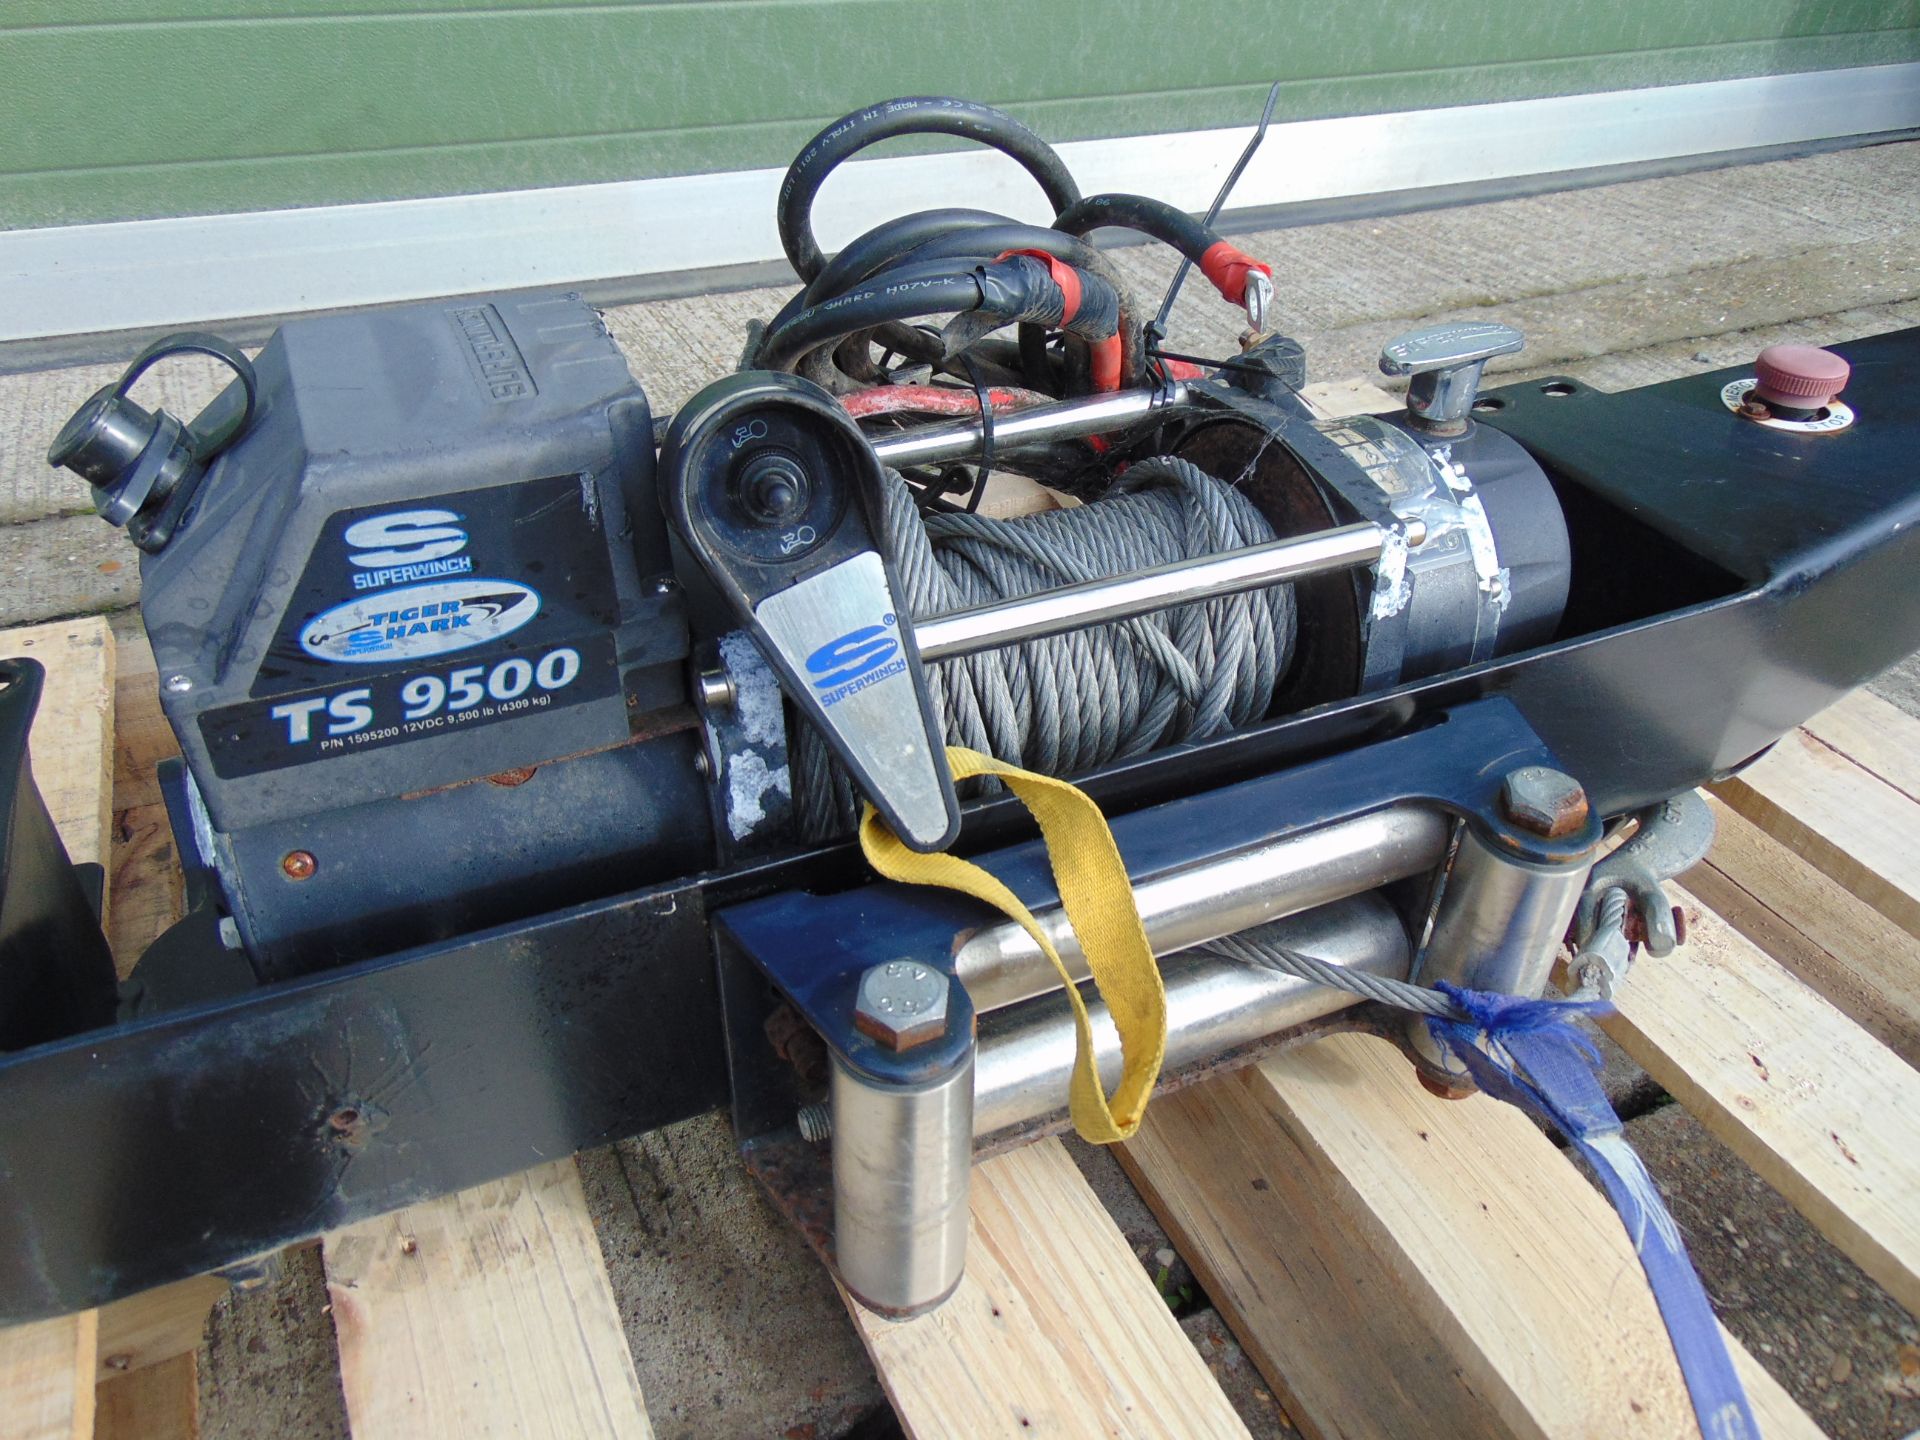 Superwinch Tiger Shark 9500lb 12 Volt Winch C/W Remote & Heavy Duty Land Rover Winching Bumper - Image 2 of 7